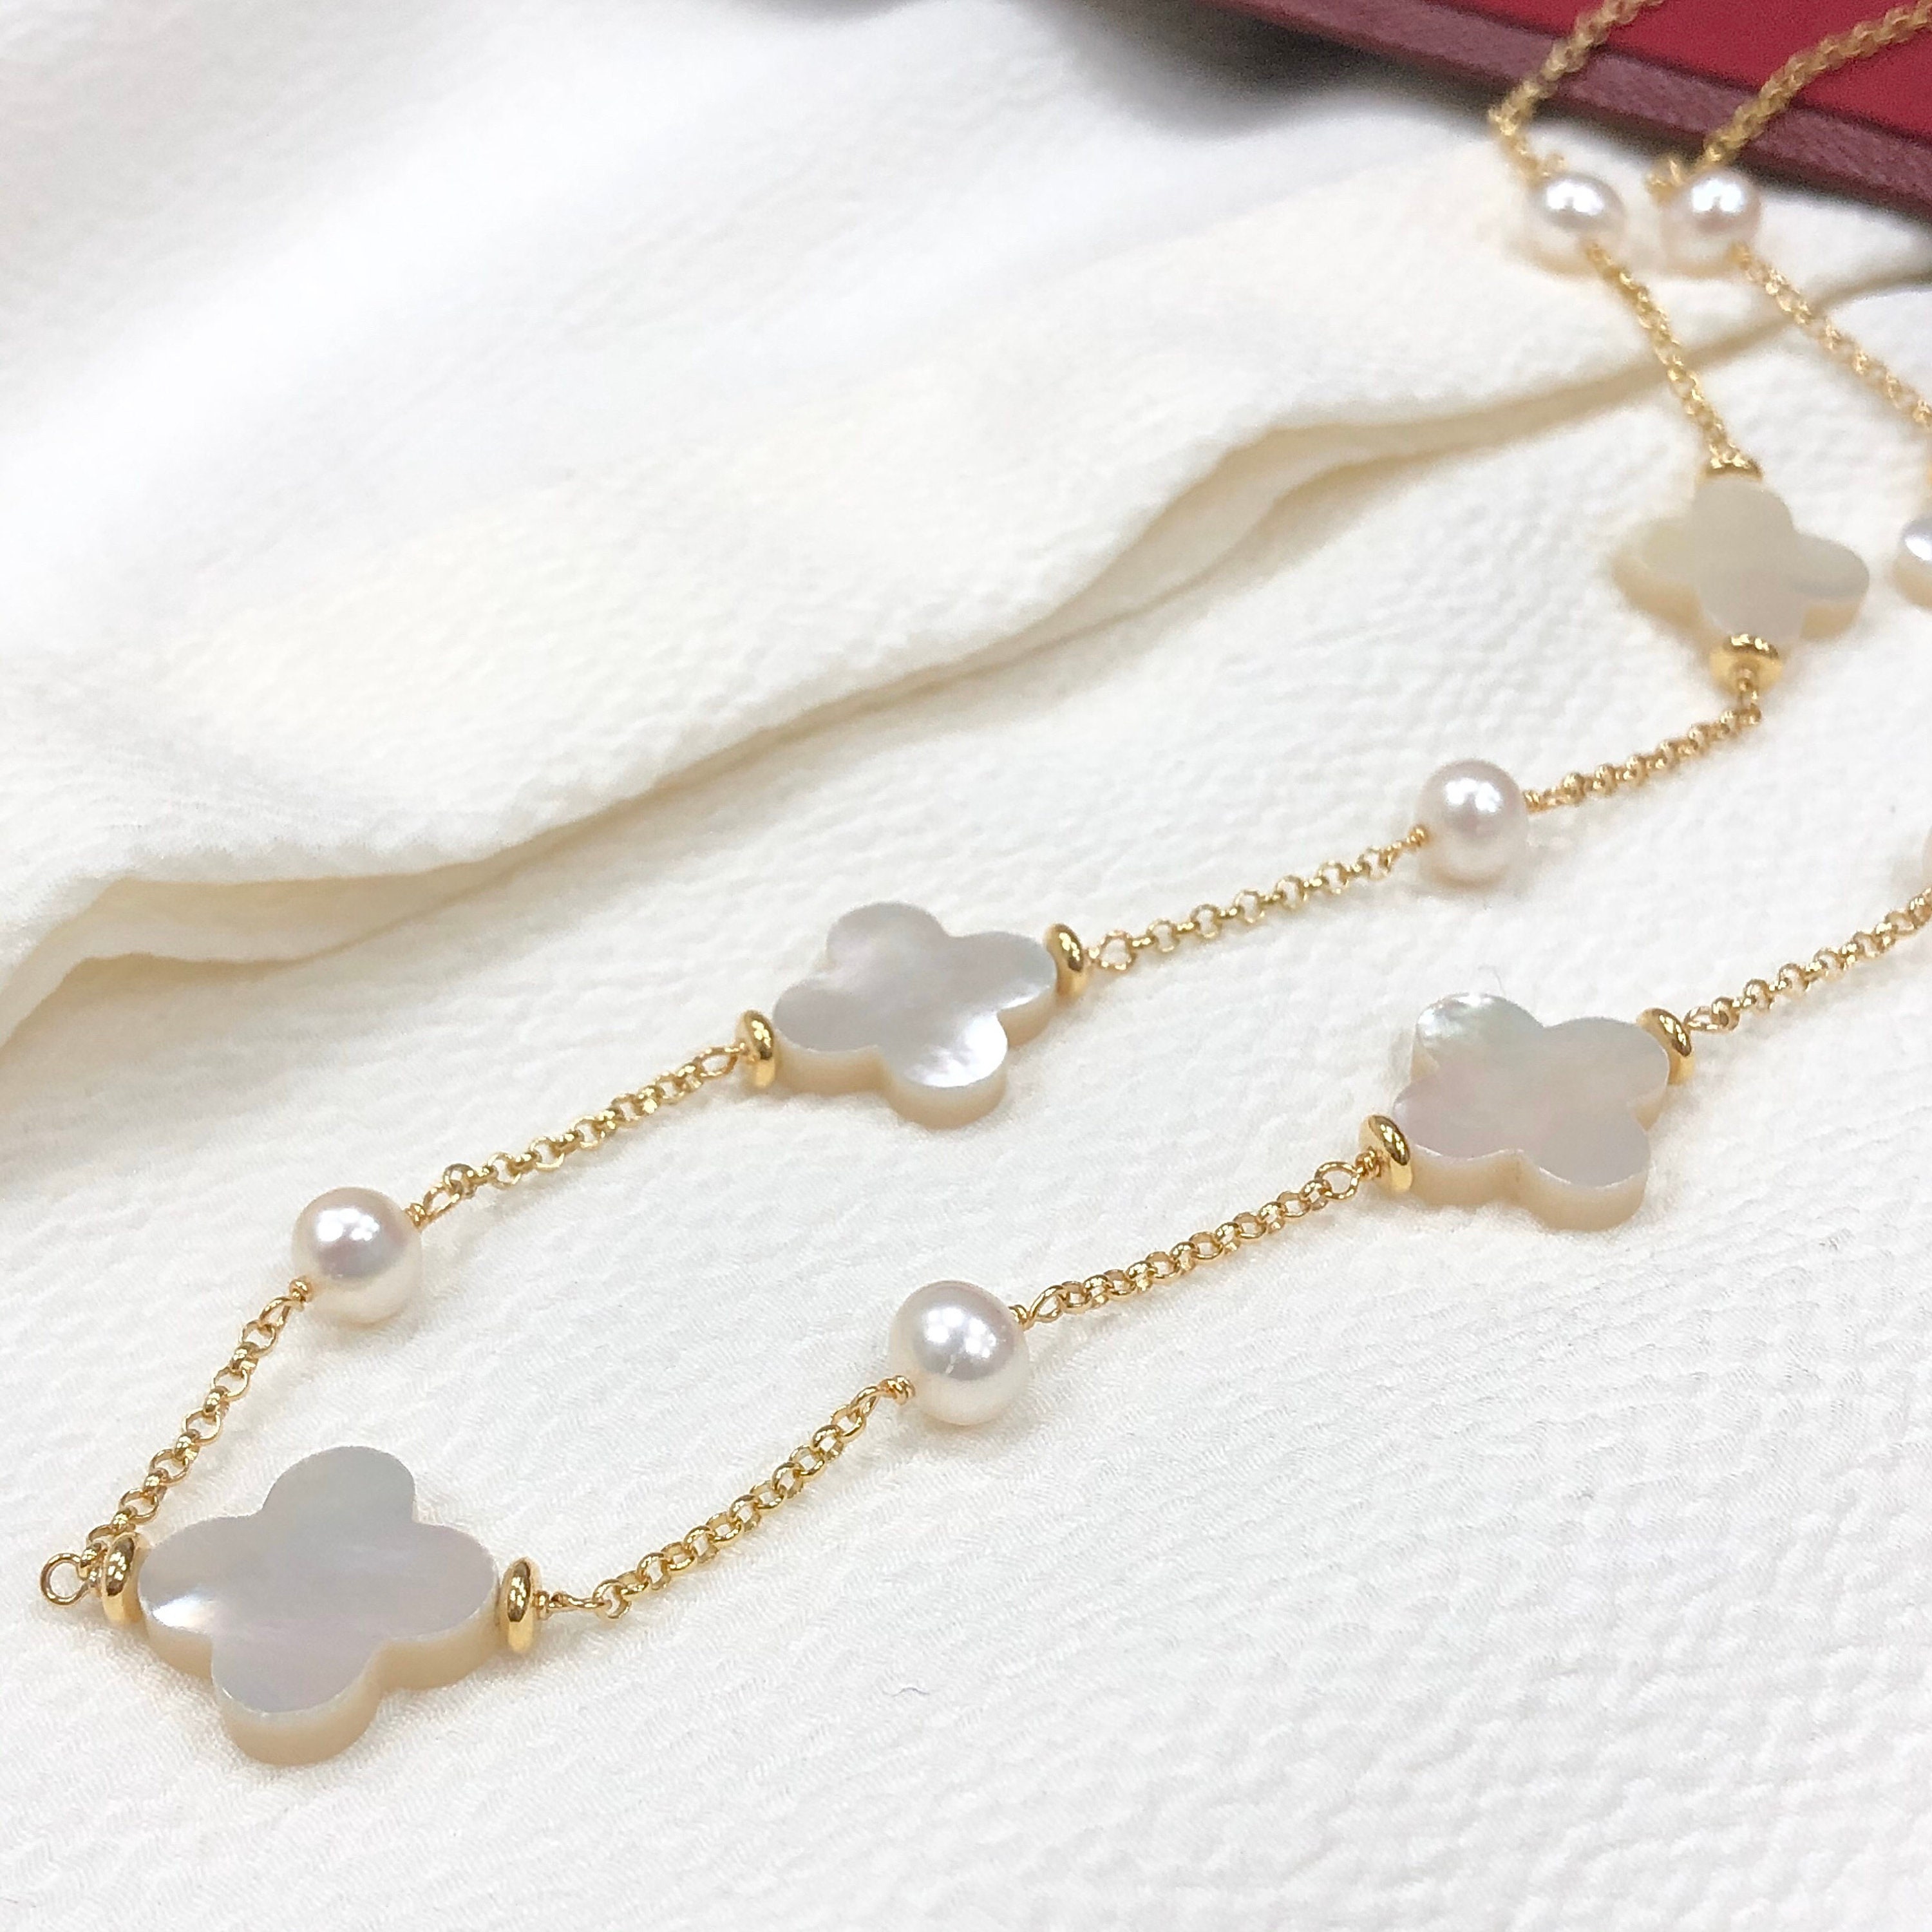 Limited Edition Pearl Necklace with Black Clover Design – Beady